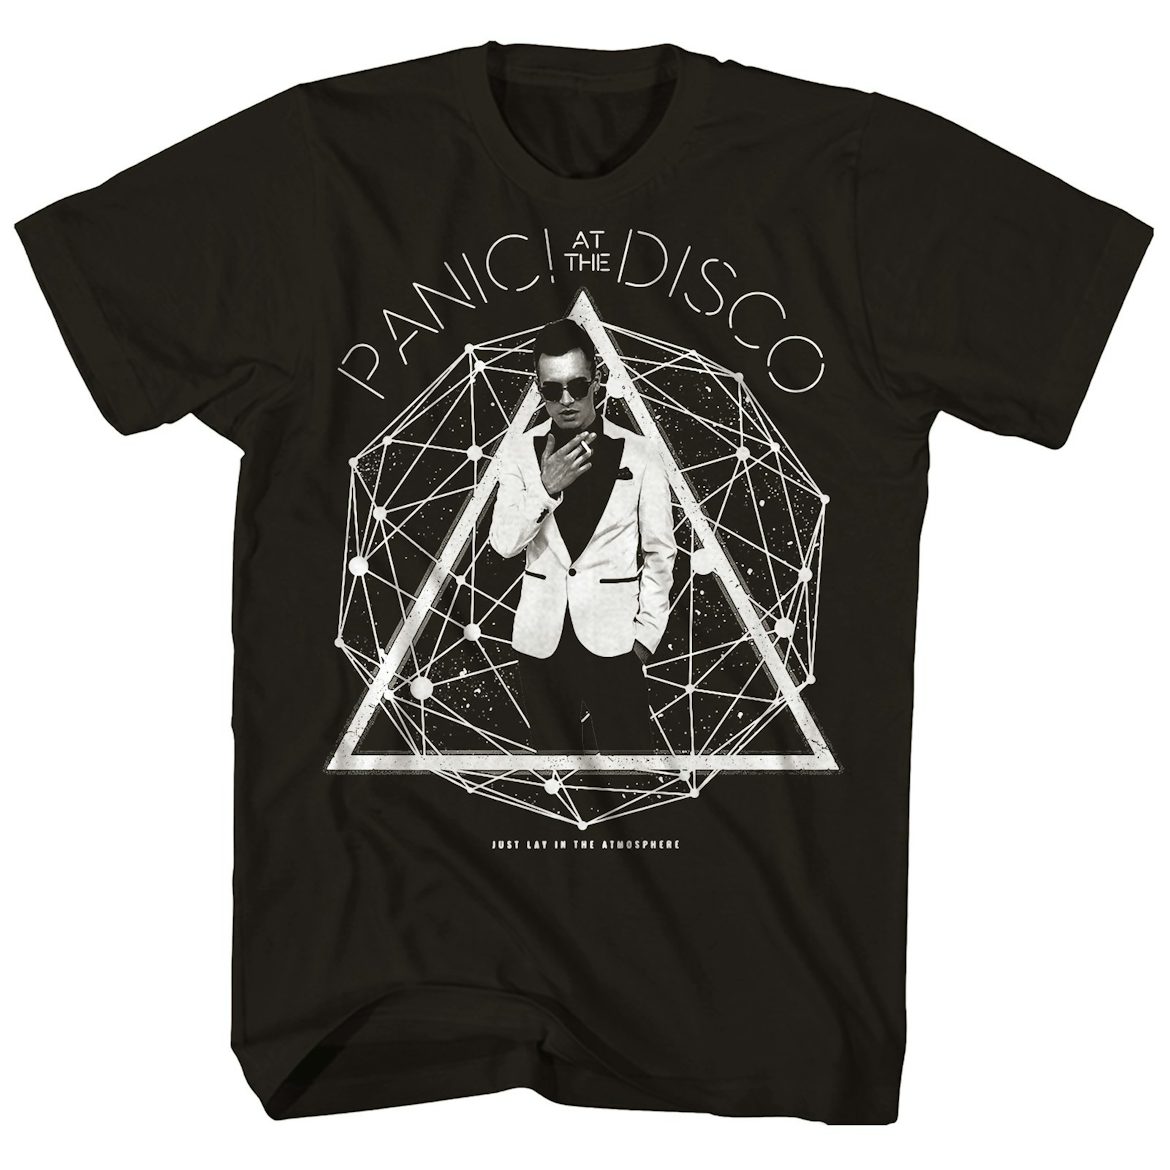 Panic At The Disco Store Official Merch & Vinyl